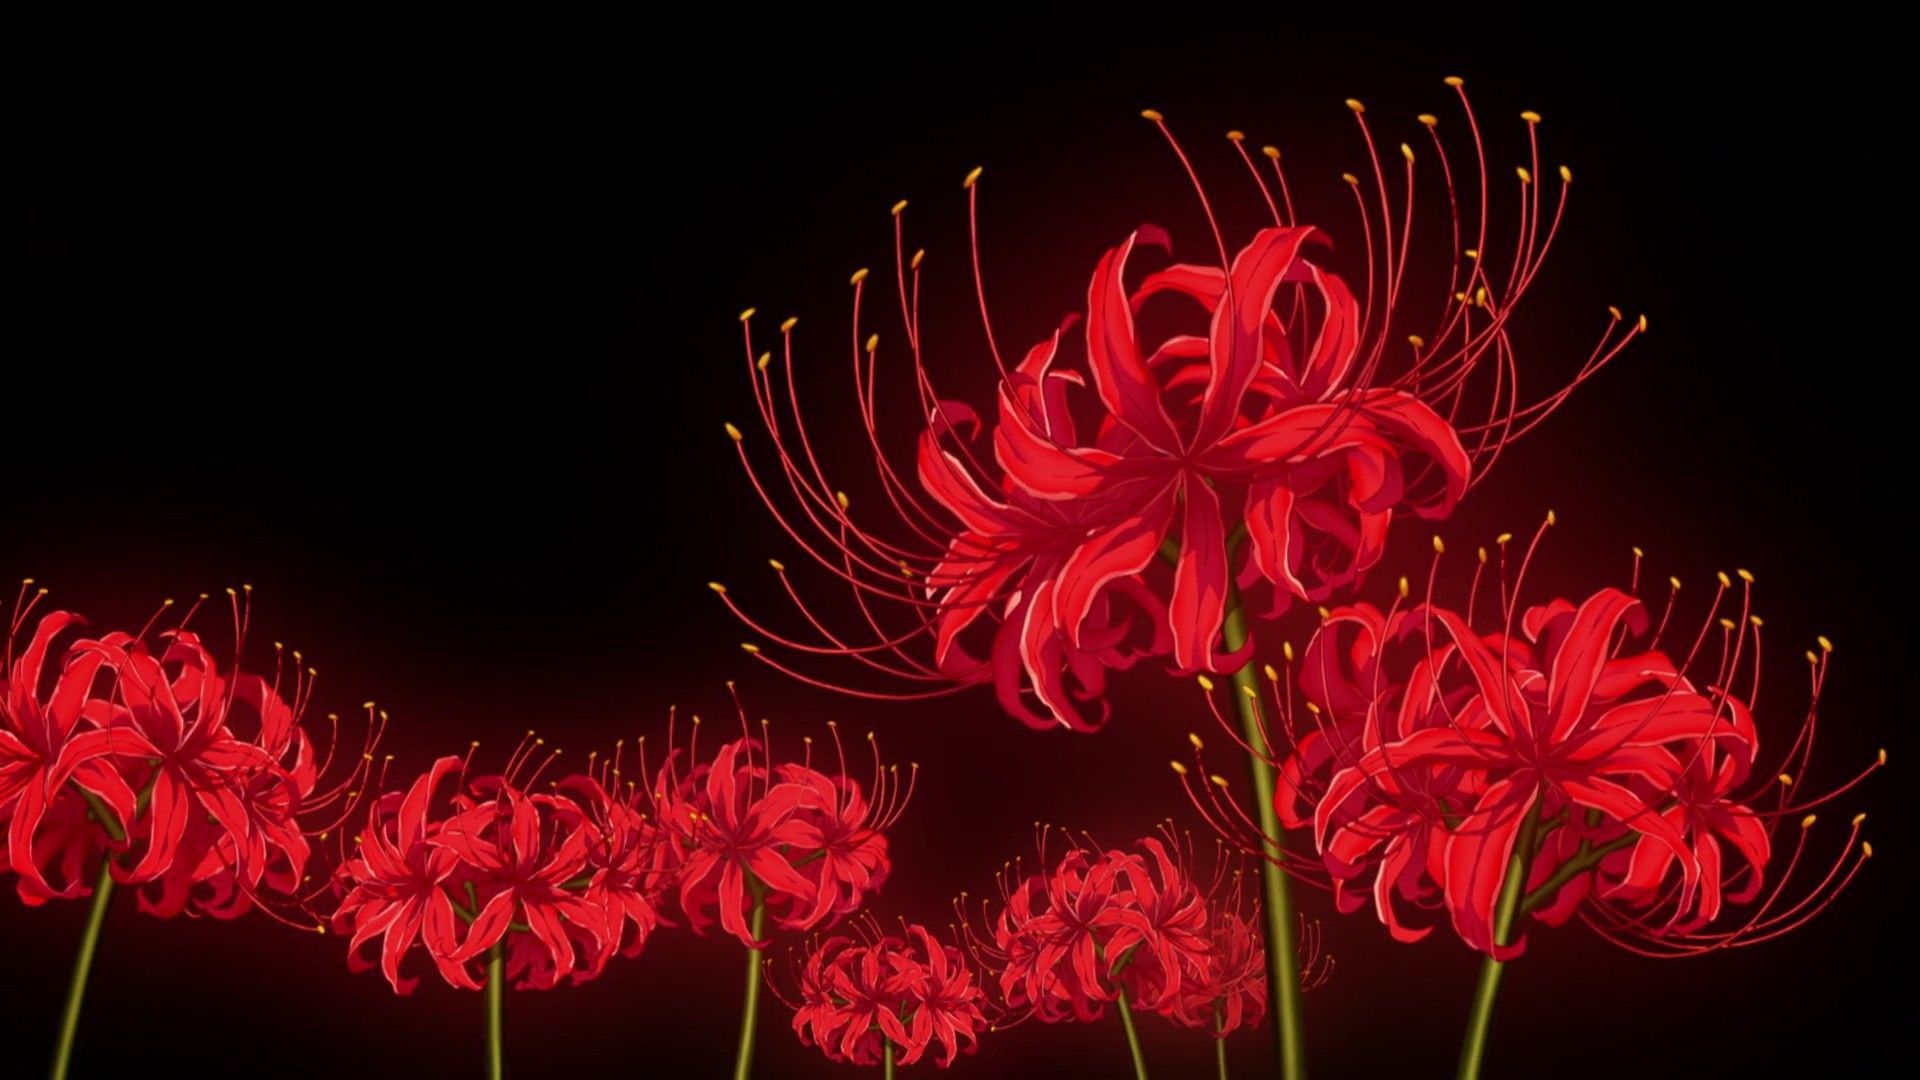 Anime Screenshot. Tokyo ghoul flower, Red spider lily, Anime scenery